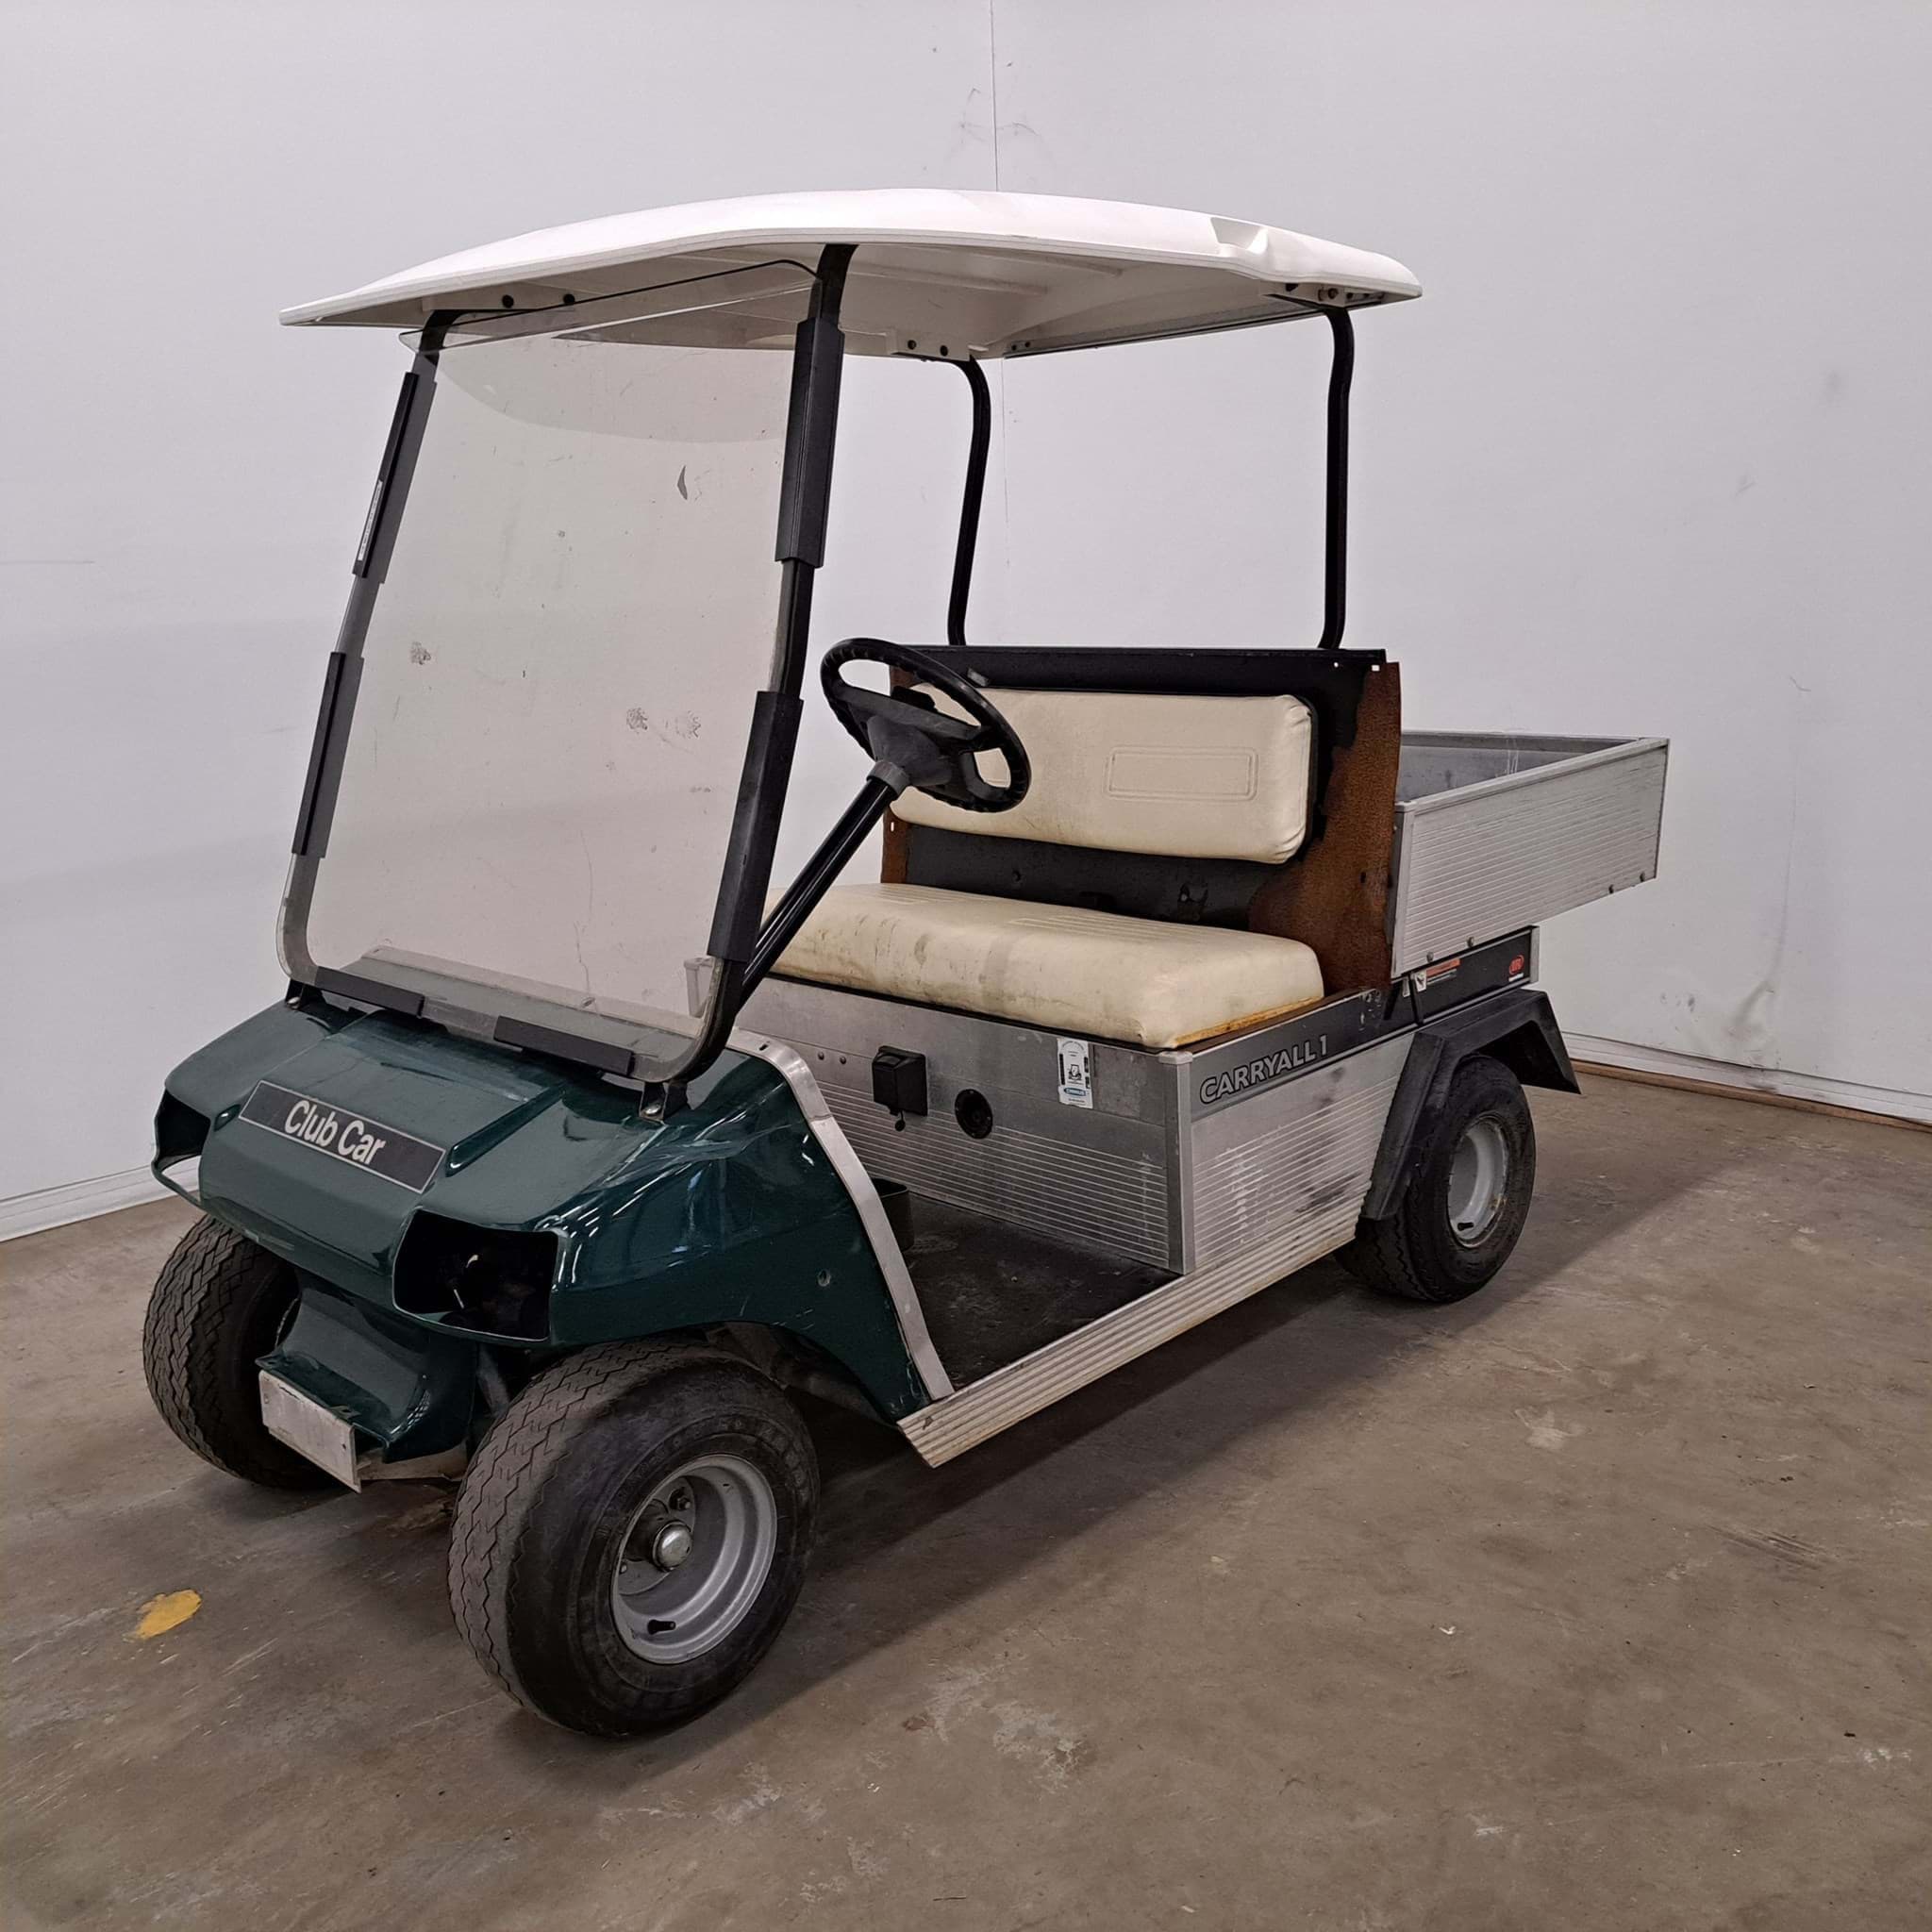 Picture of Trade - 2006 - Electric - Club Car - Carryall 1 - Open cargo box - Green